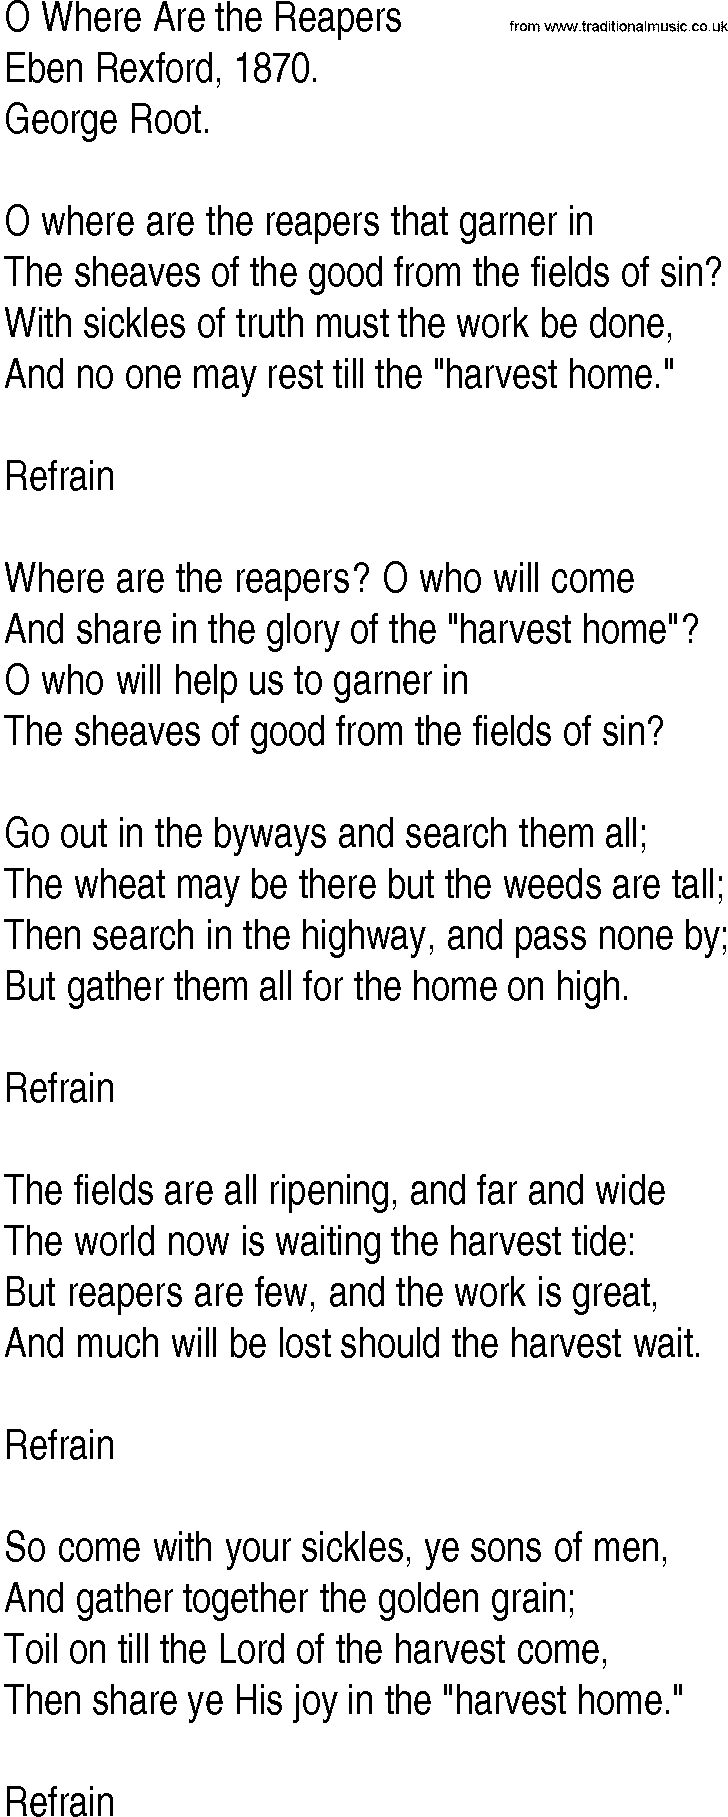 Hymn and Gospel Song: O Where Are the Reapers by Eben Rexford lyrics